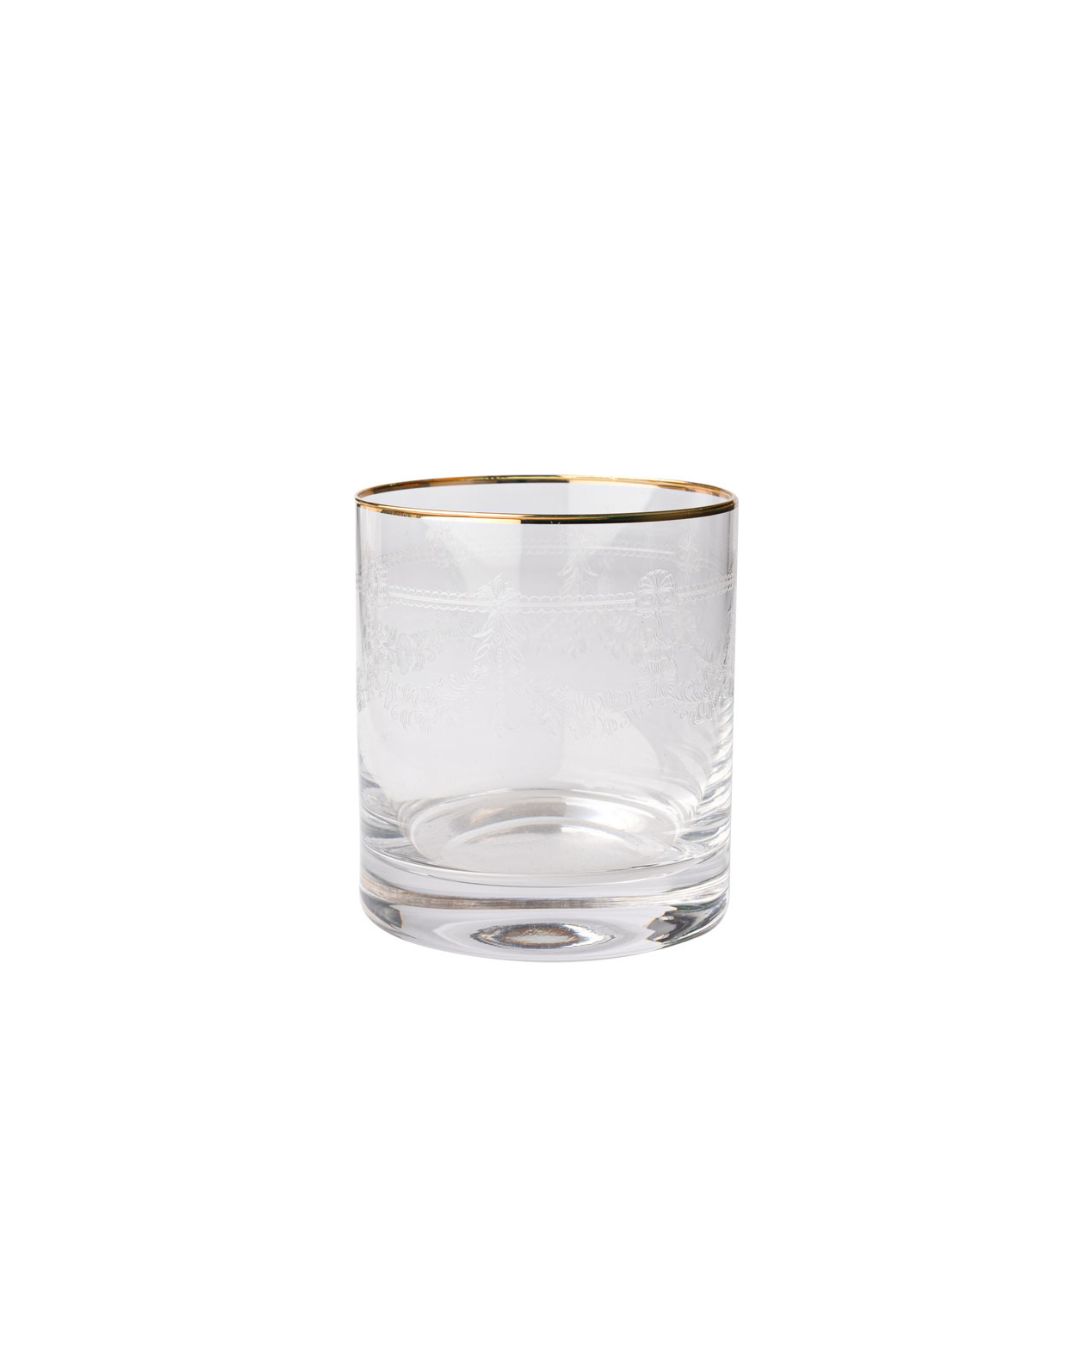 Tumbler Glass with Gold Rim